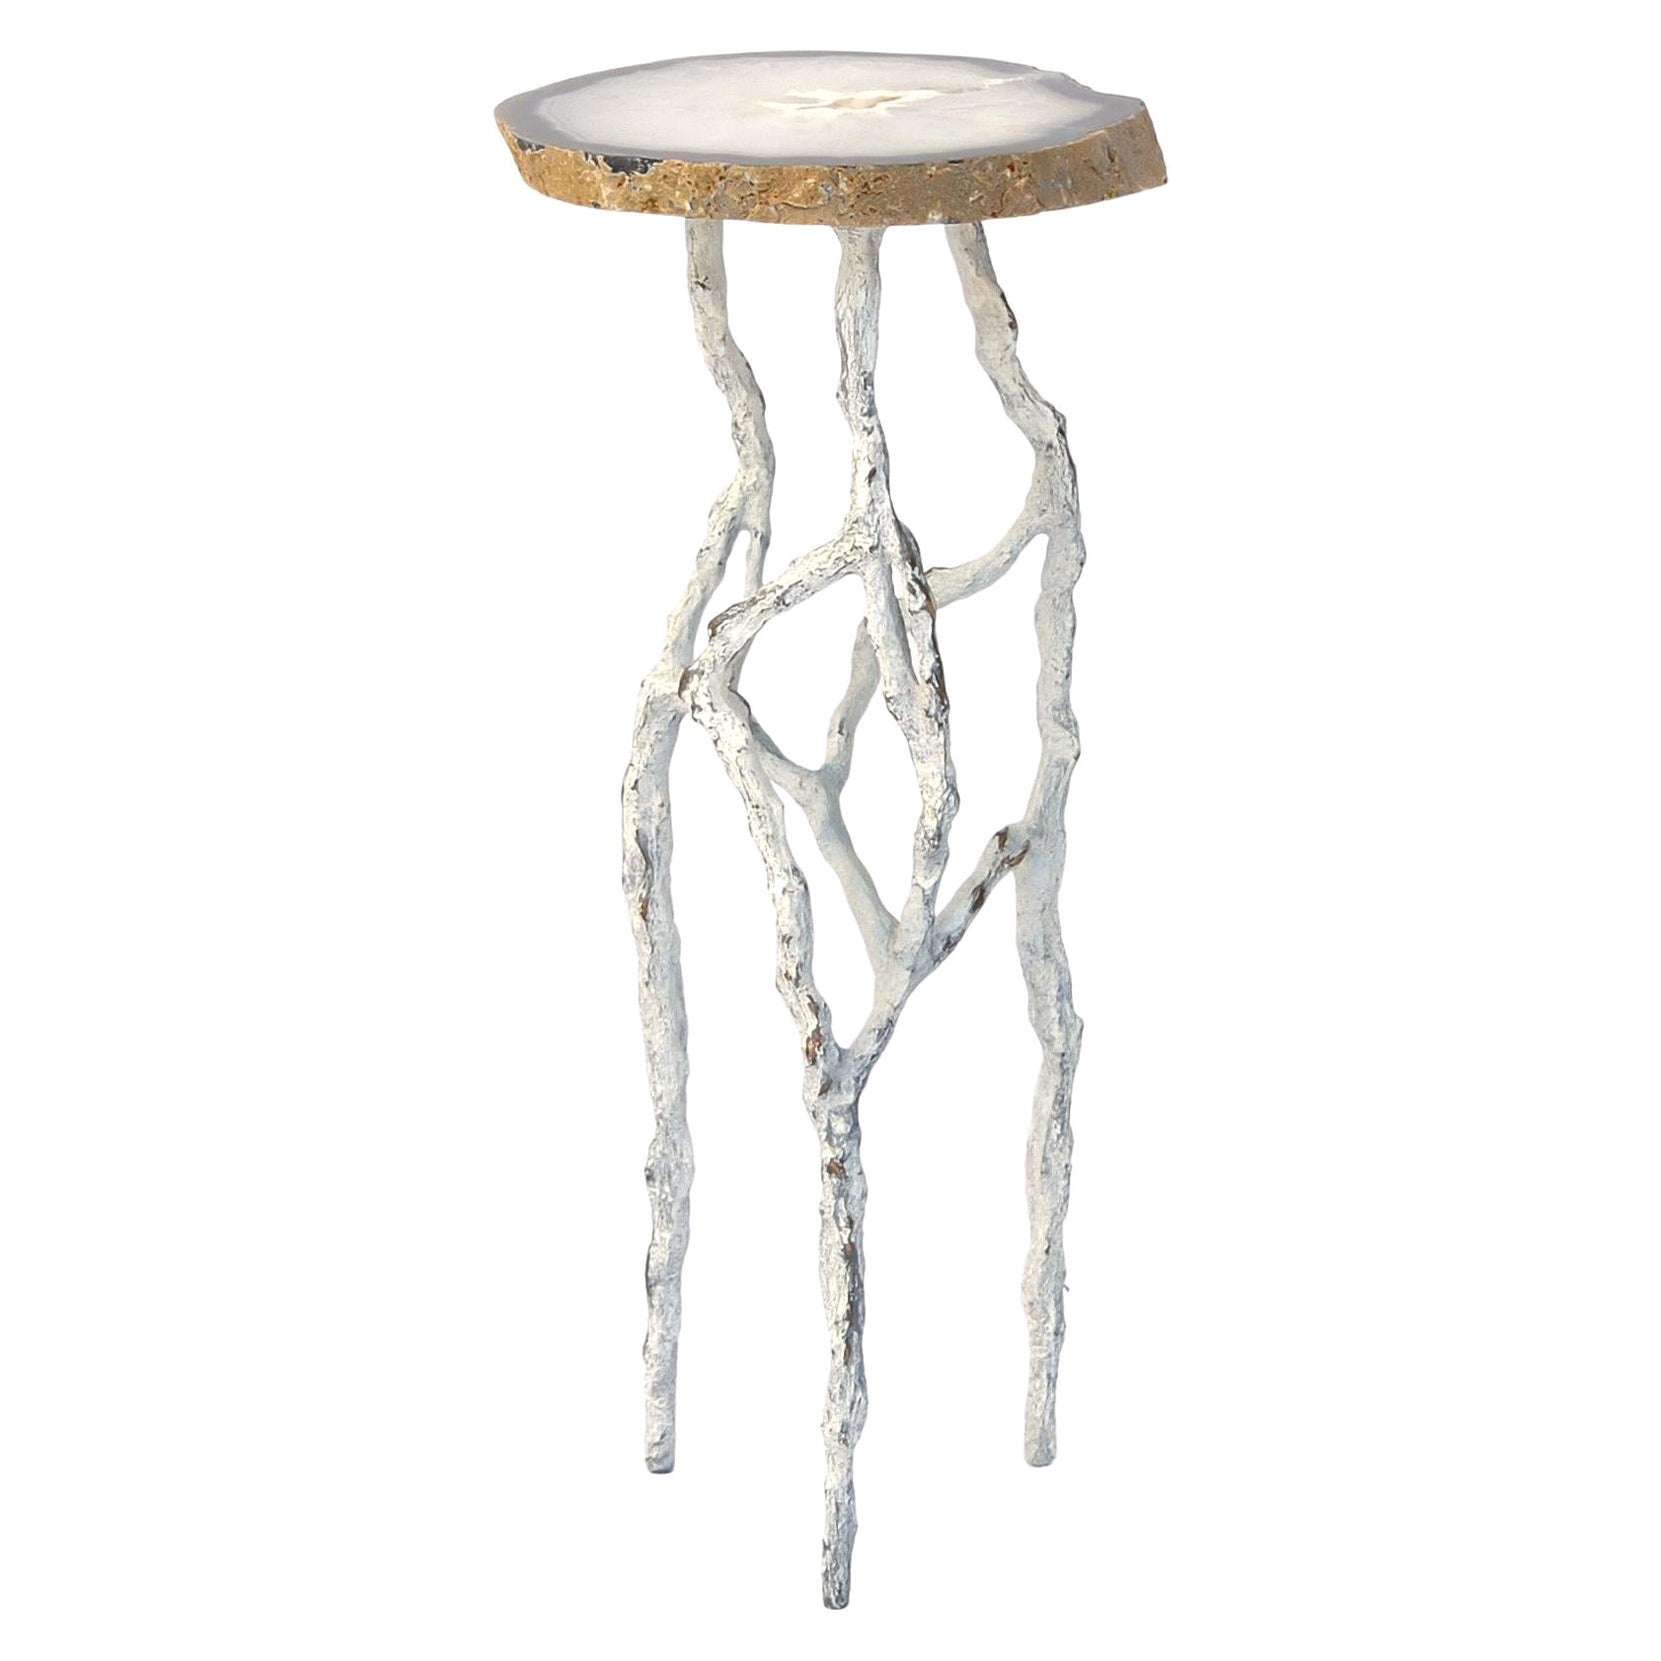 Alexia 3 Drink Table with Agate Top by Fakasaka Design